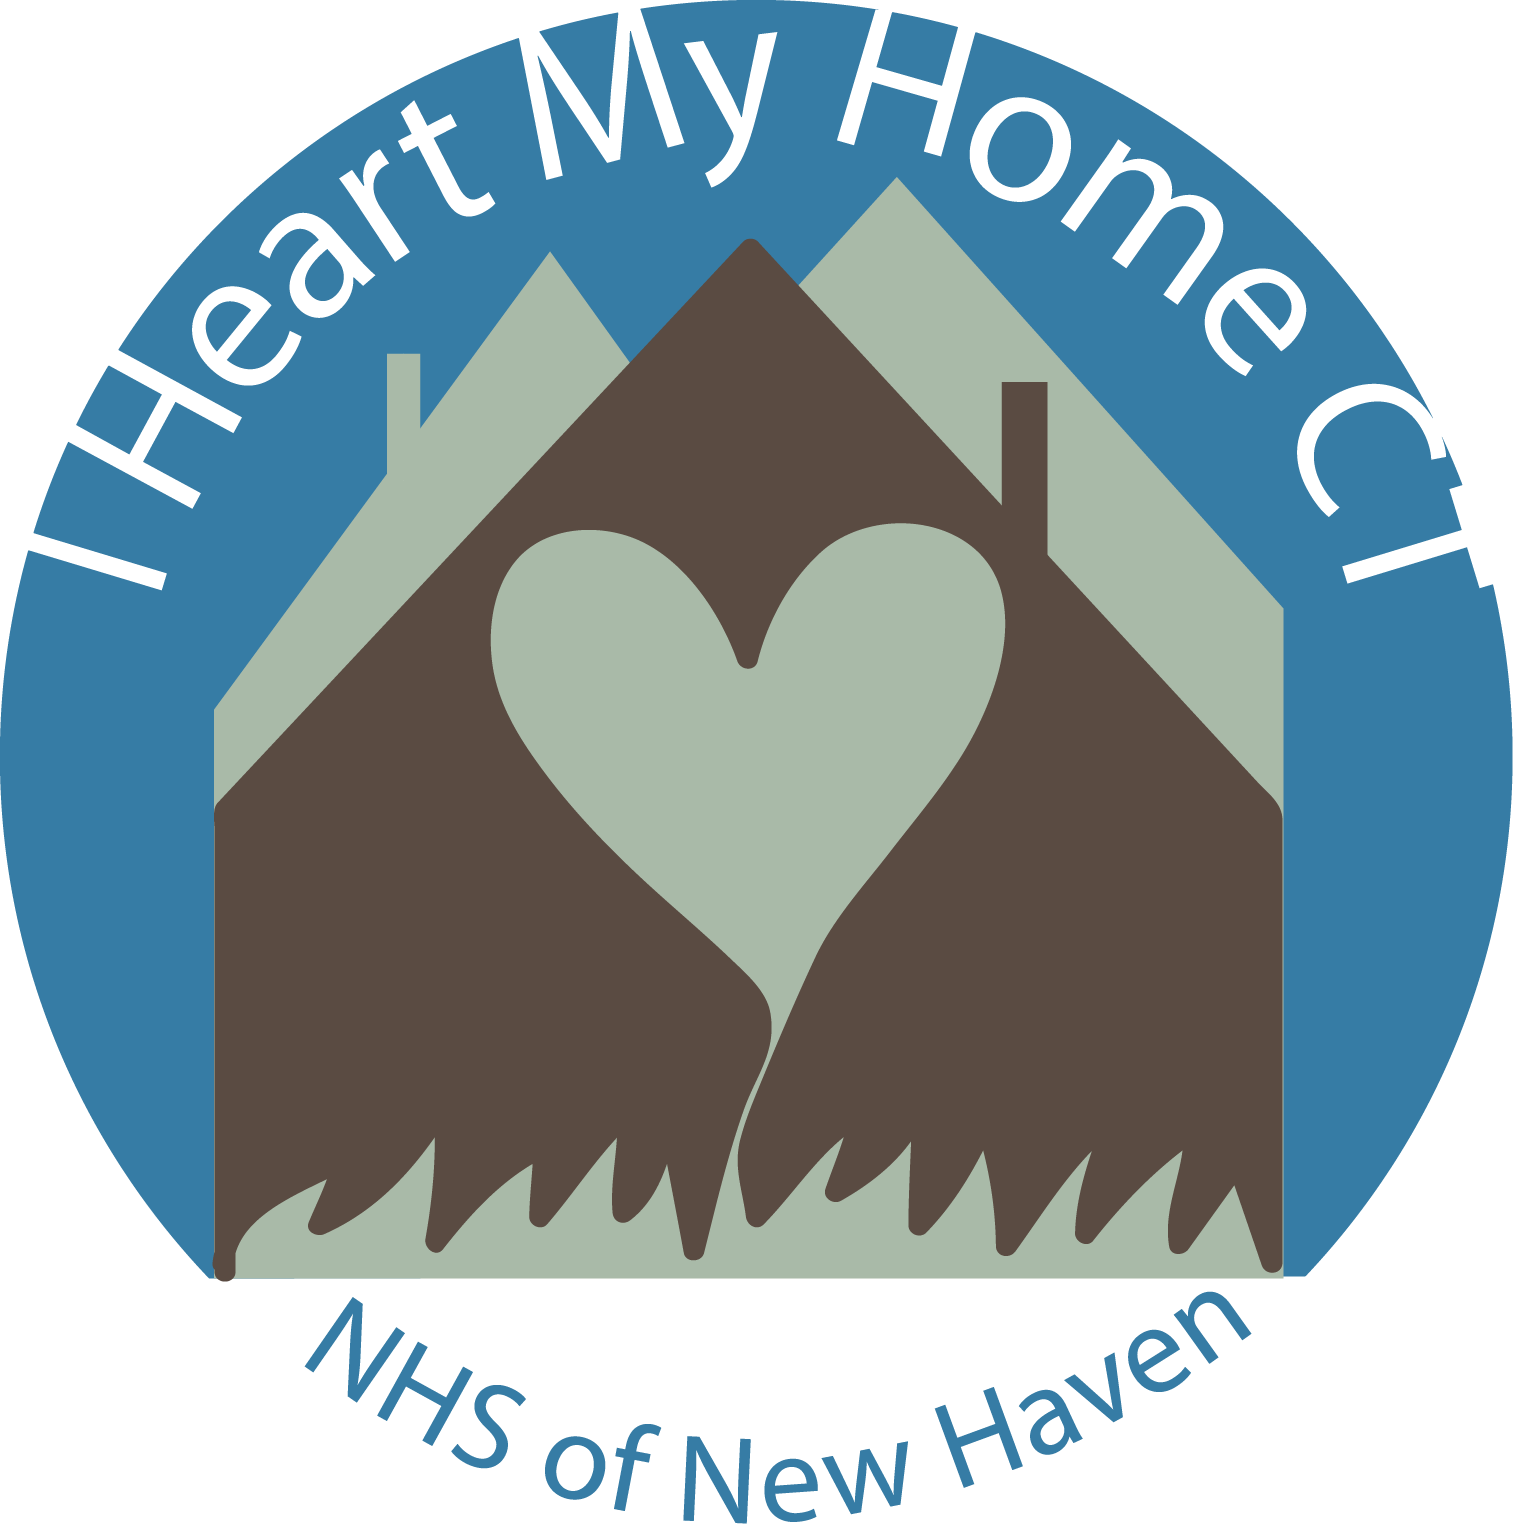 NHS of New Haven assists CT renters and landlords impacted by COVID-19